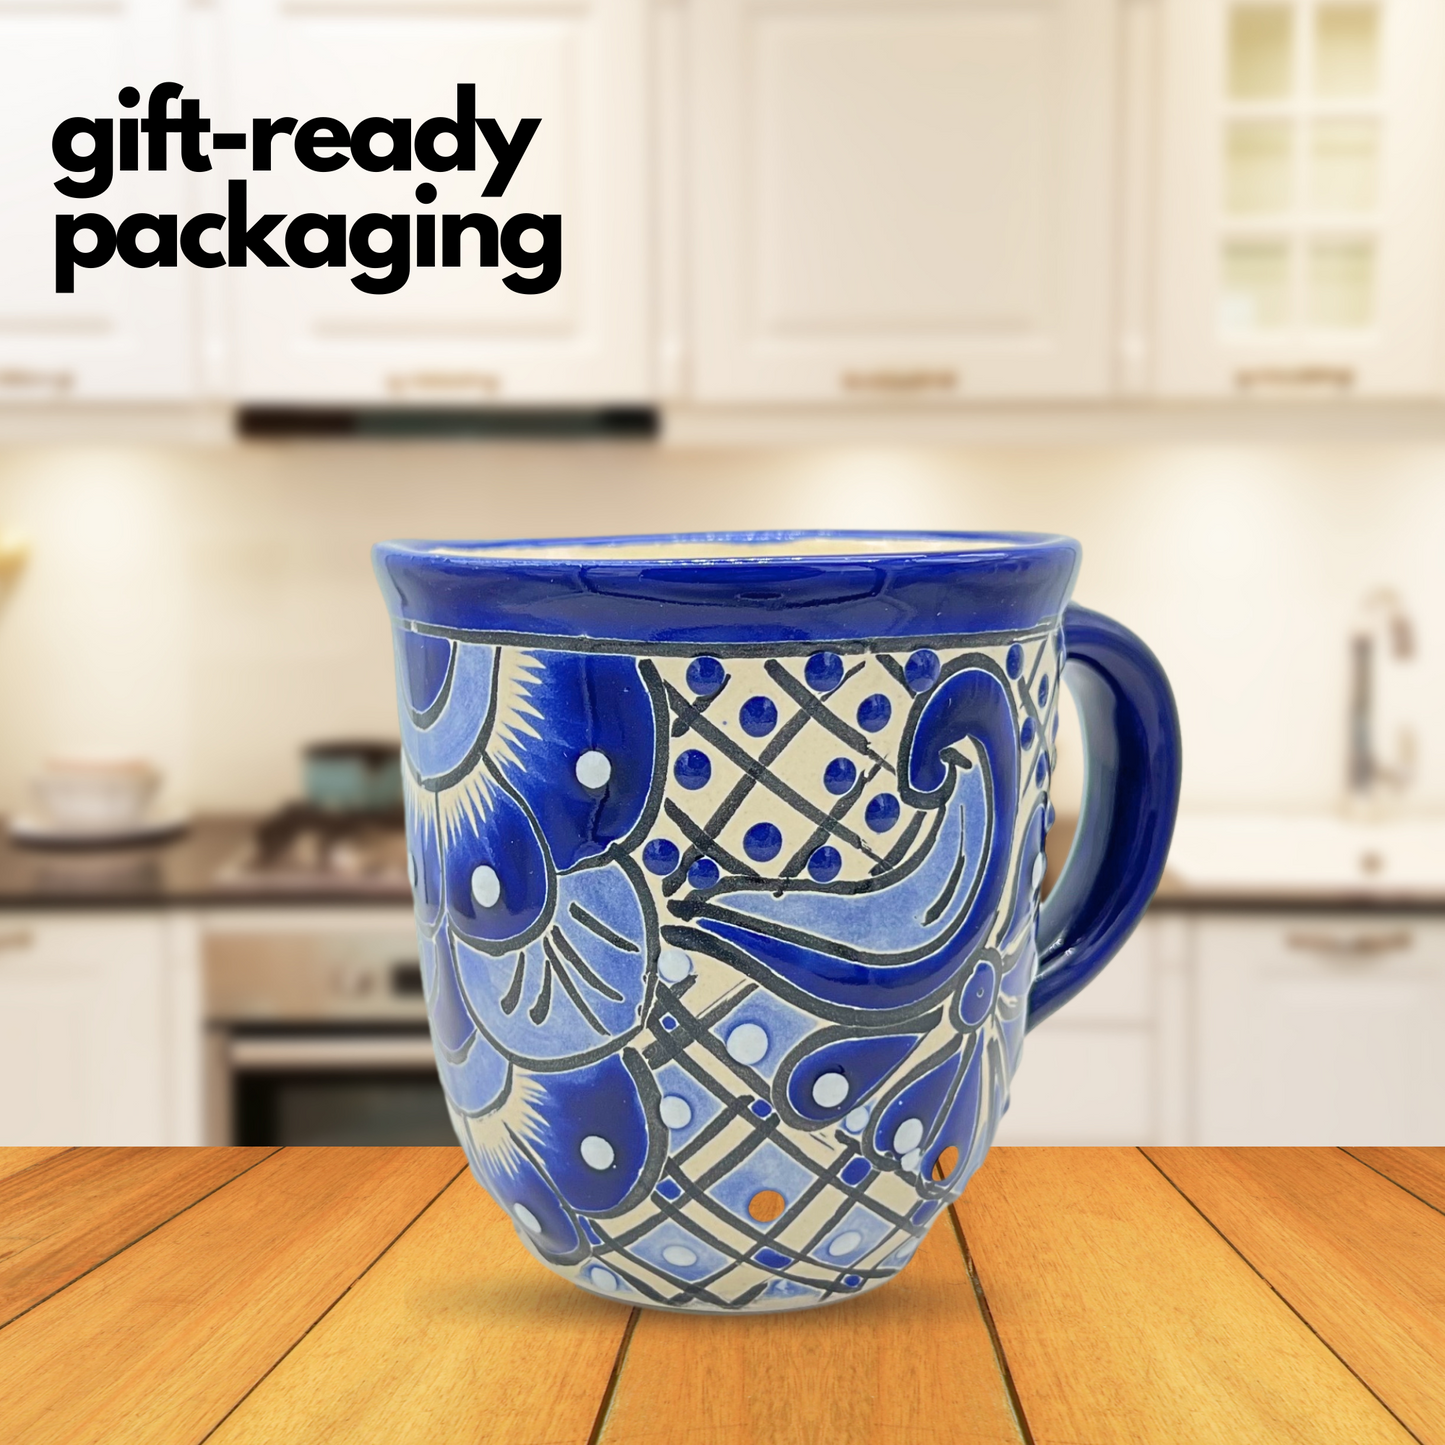 Enjoy your beverage with our Hand-Painted Talavera Coffee Mug. Authentic Mexican decor meets functionality. Perfect gift. Free Shipping!